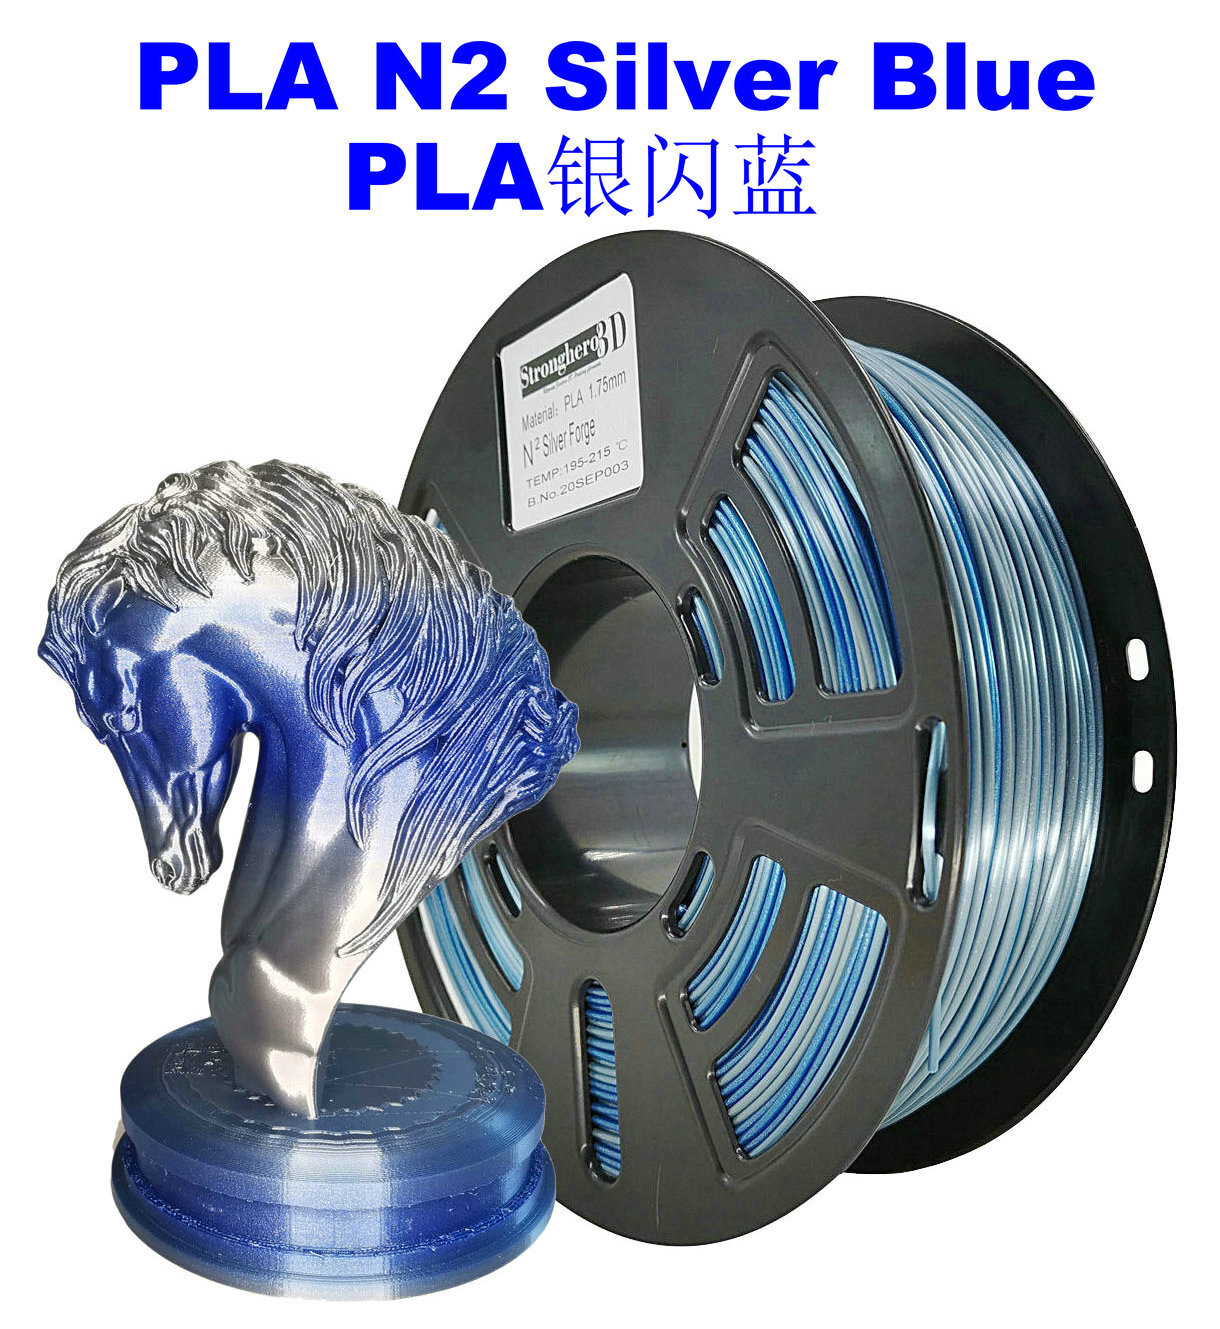 EU Available Stronghero3D PLA 3D Printer Filament 1.75mm Colours available  choose Net Weight 1kg for Anet Creality A8 Cr10 Ender3 German Warehouse